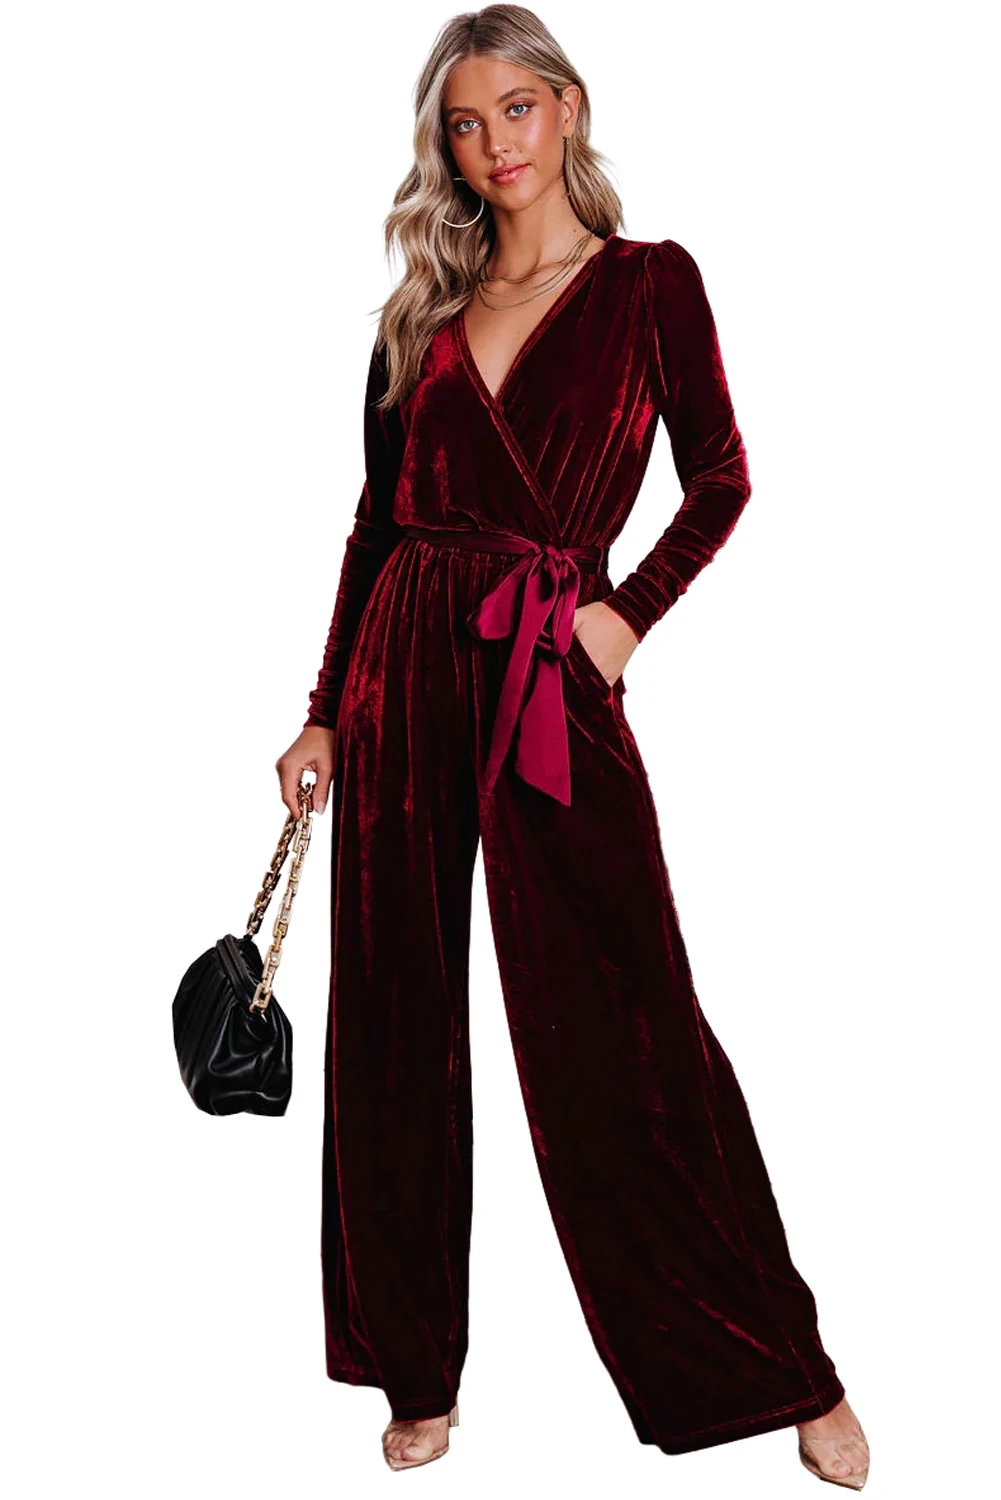 Dear-Lover Fiery Red Velvet Pocketed Cut Out Back Long Sleeve Flare Wide Leg Sexy Elegant Women's Chic Jumpsuit For Wedding